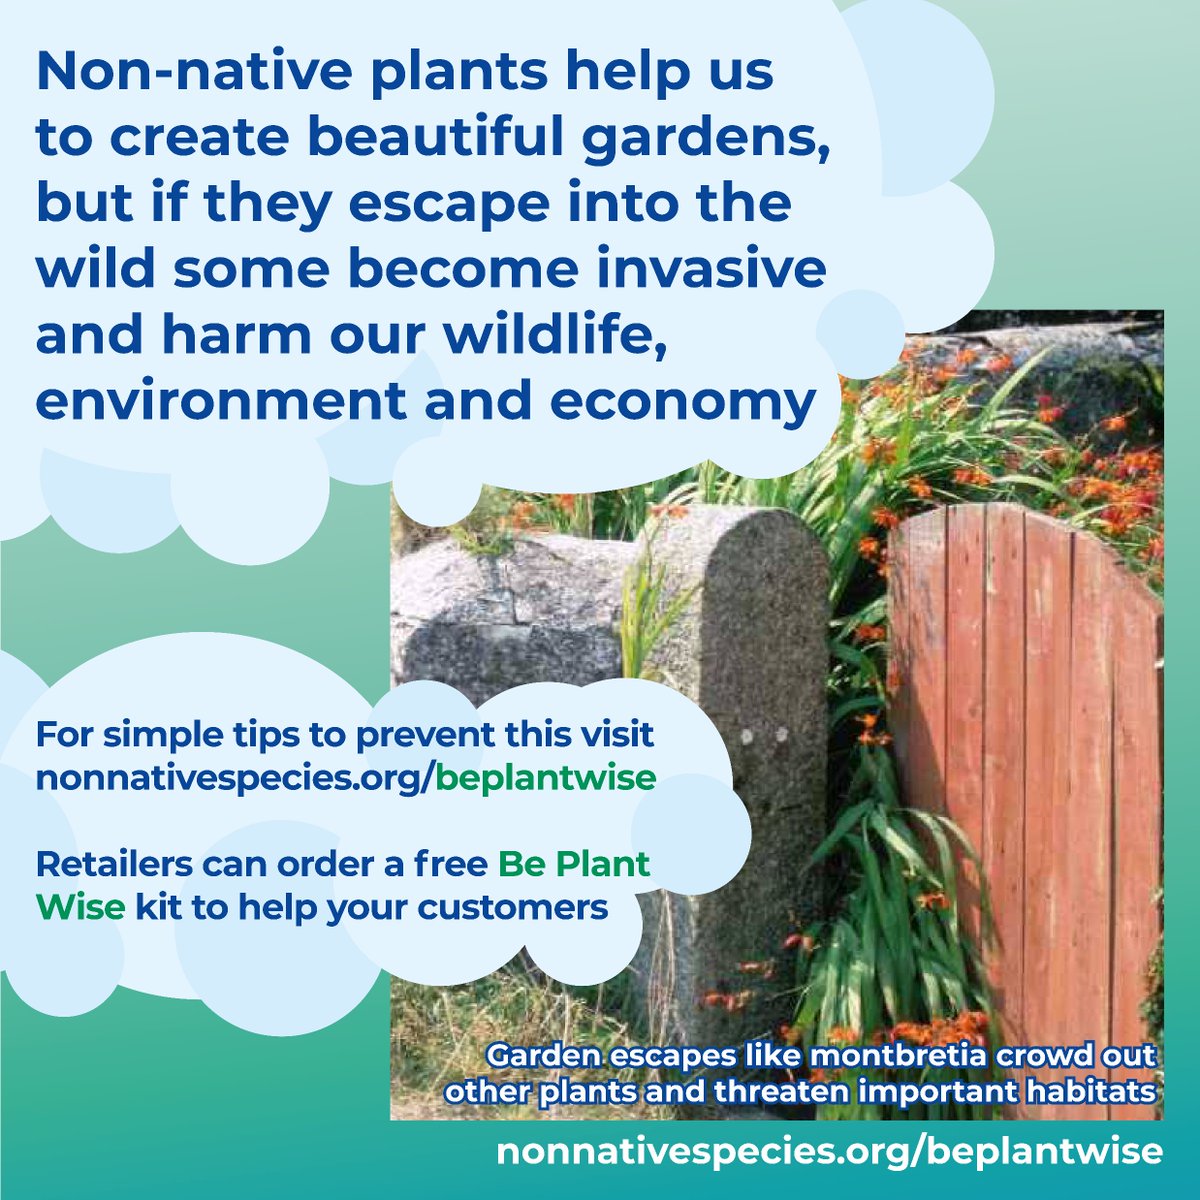 #InvasivePlants like montbretia can: - cause devastating environmental impacts🌍 - be extremely costly to control 💰 - interfere with our health and way of life ❌ #BePlantWise and dispose of your garden waste responsibly to prevent their spread nonnativespecies.org/beplantwise